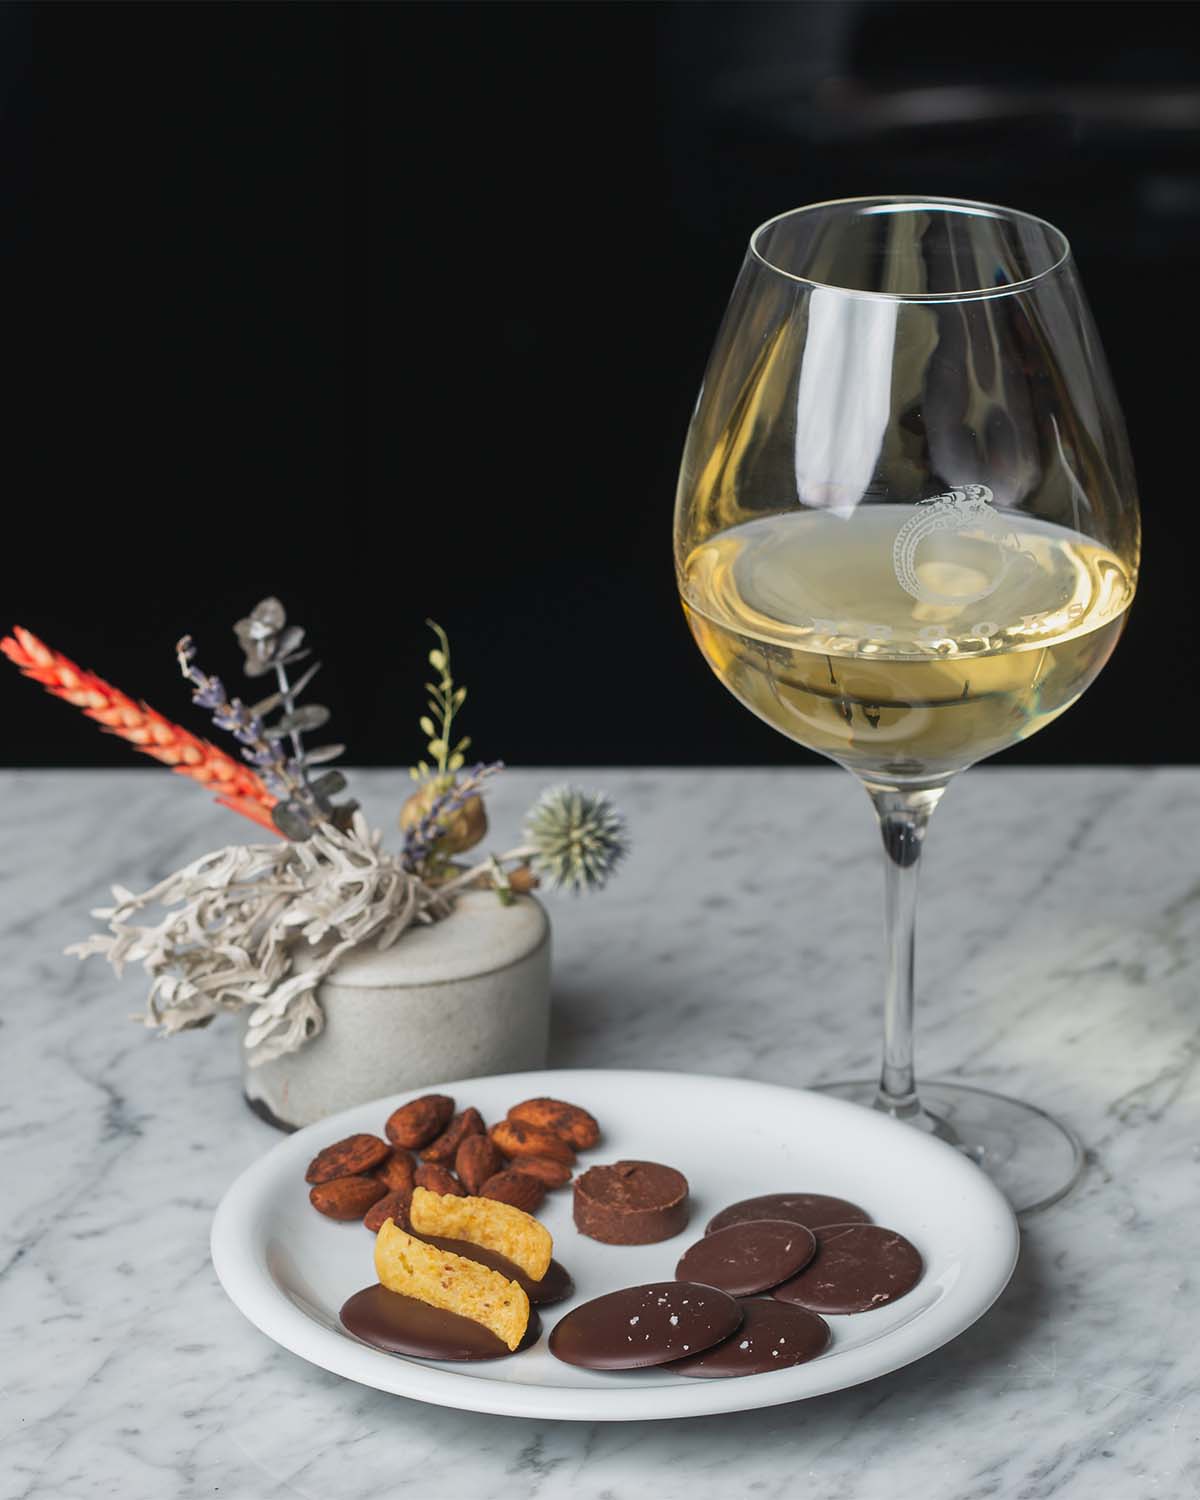 Glass of Brooks Riesling with various chocolate bites